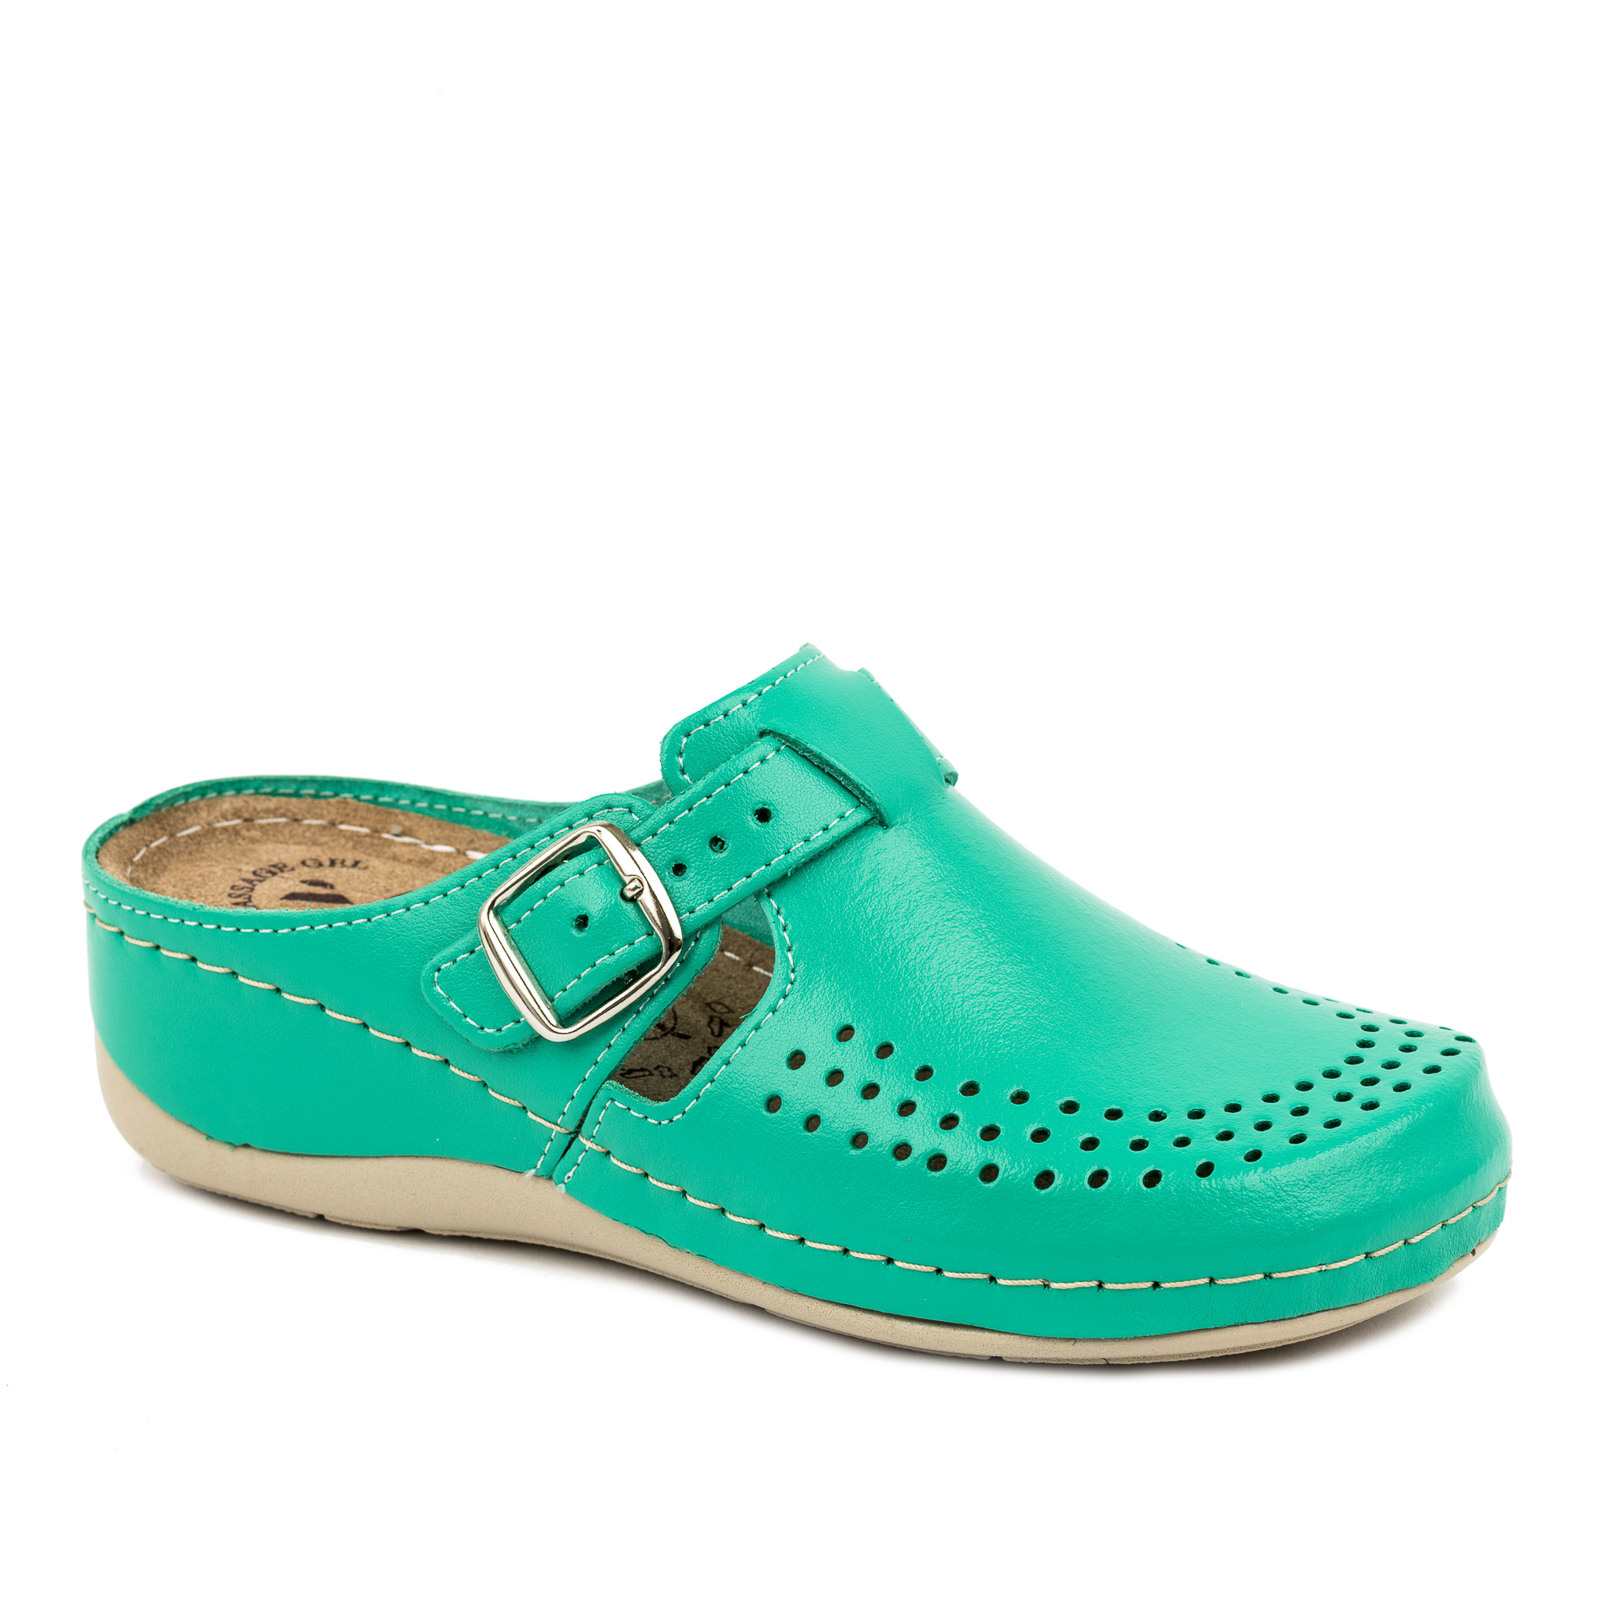 HIGH SOLE ANATOMIC LEATHER CLOGS  - GREEN